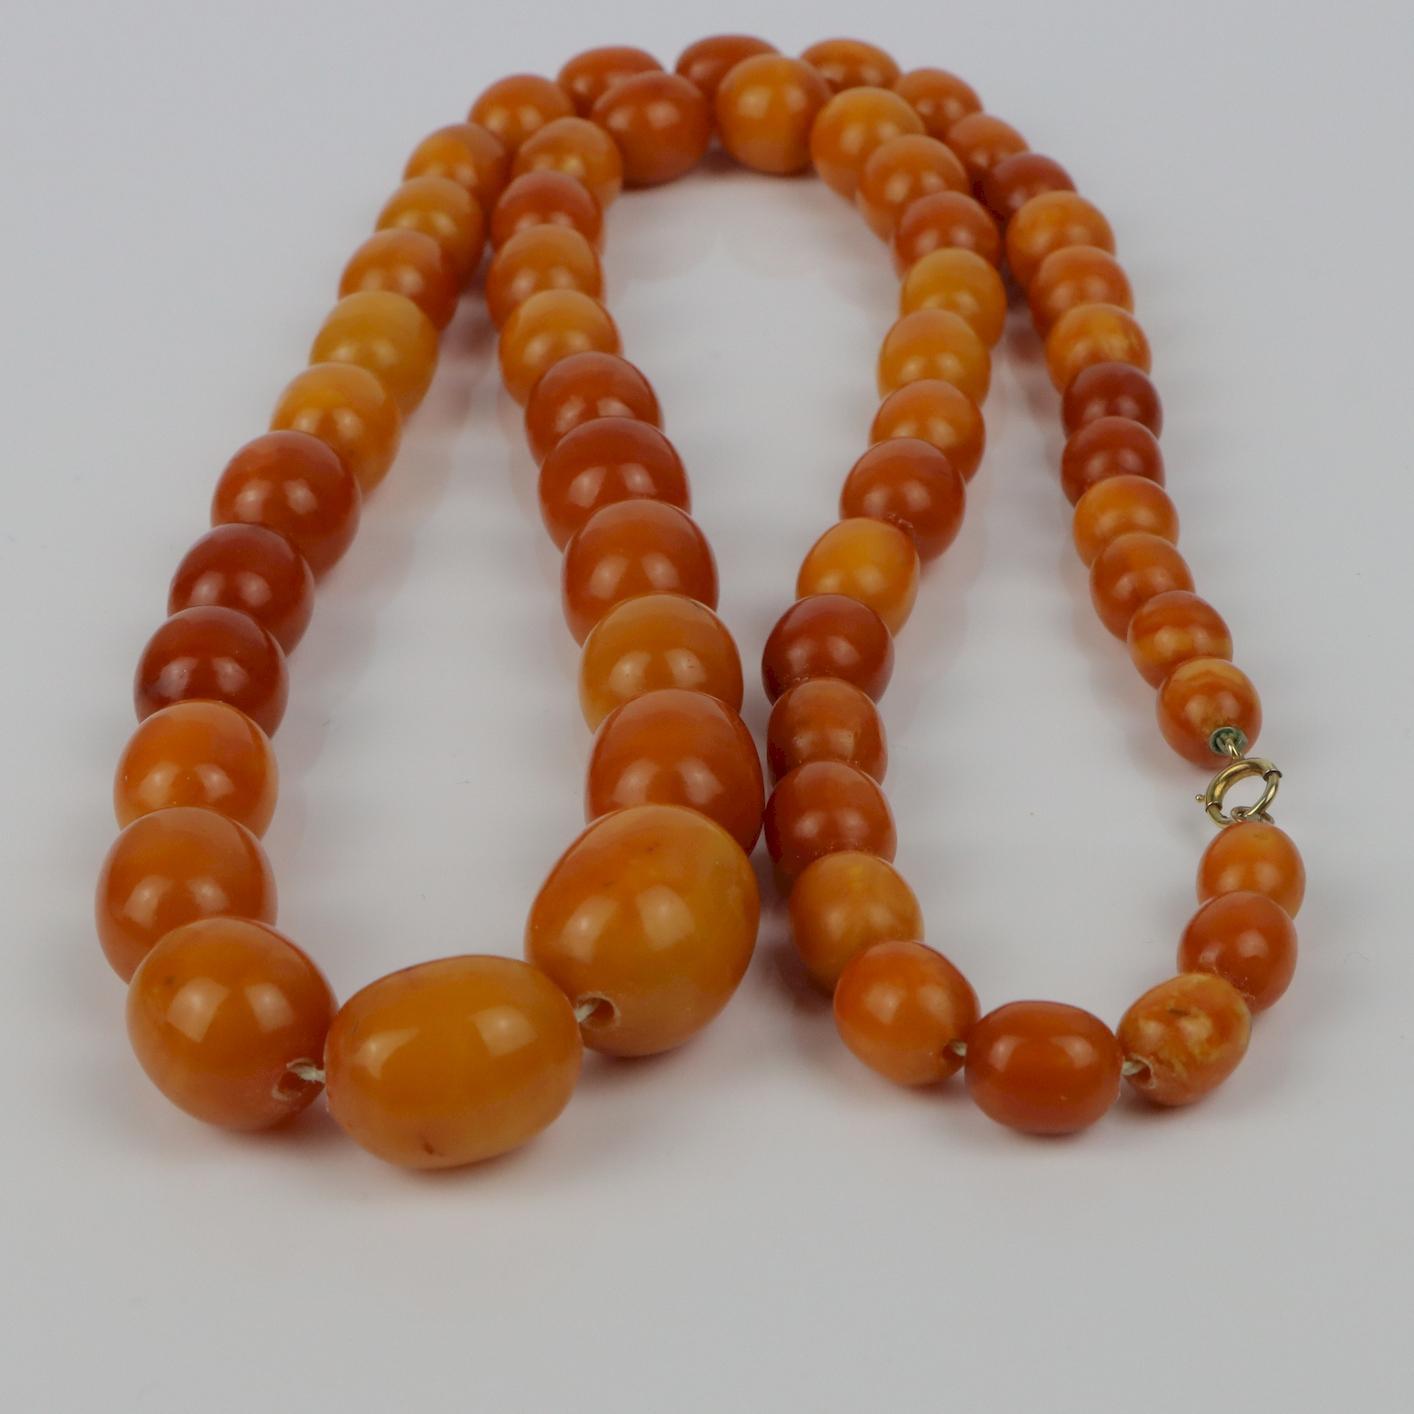 Antique 14K Gold Beeswax Amber Bead Necklace For Sale 8